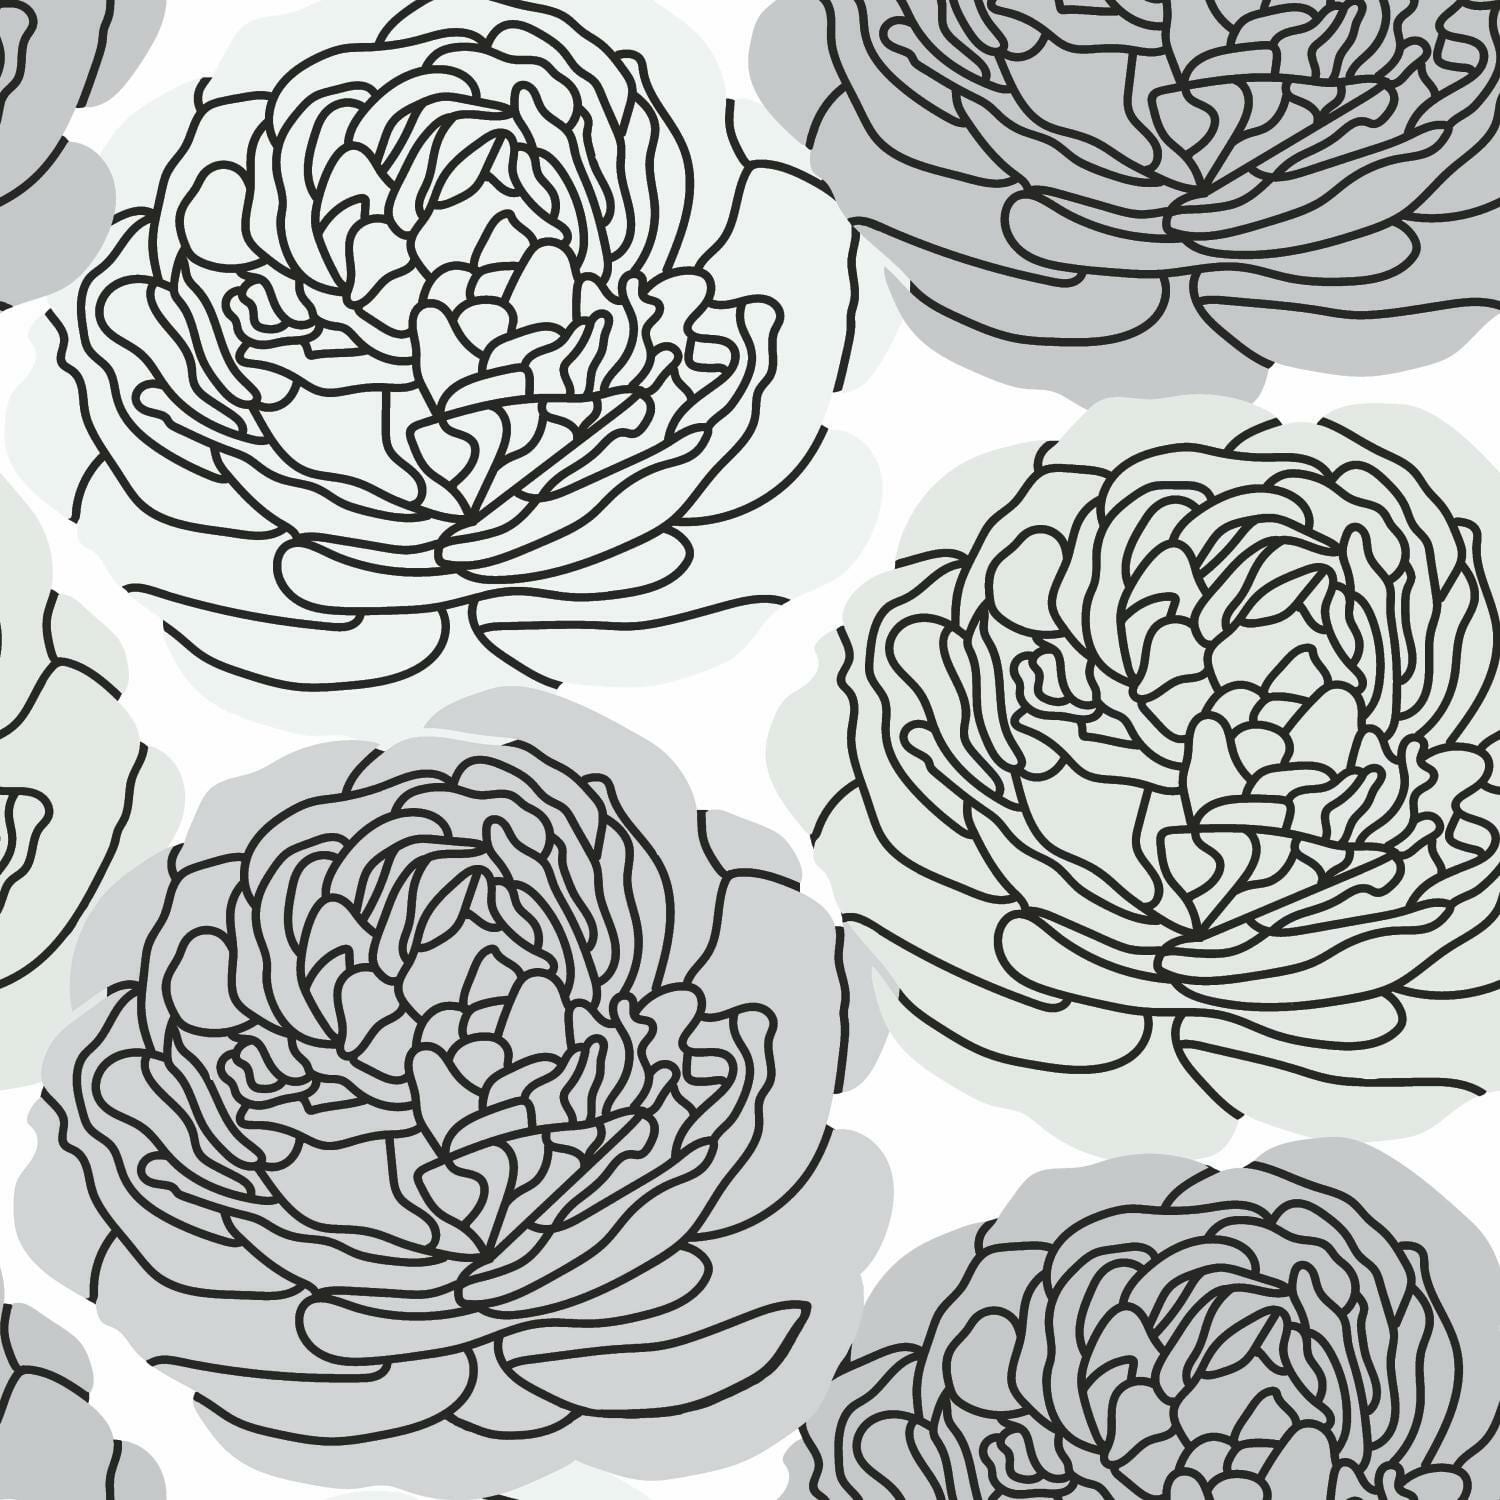 RoomMates Bed of Roses Peel & Stick Wallpaper